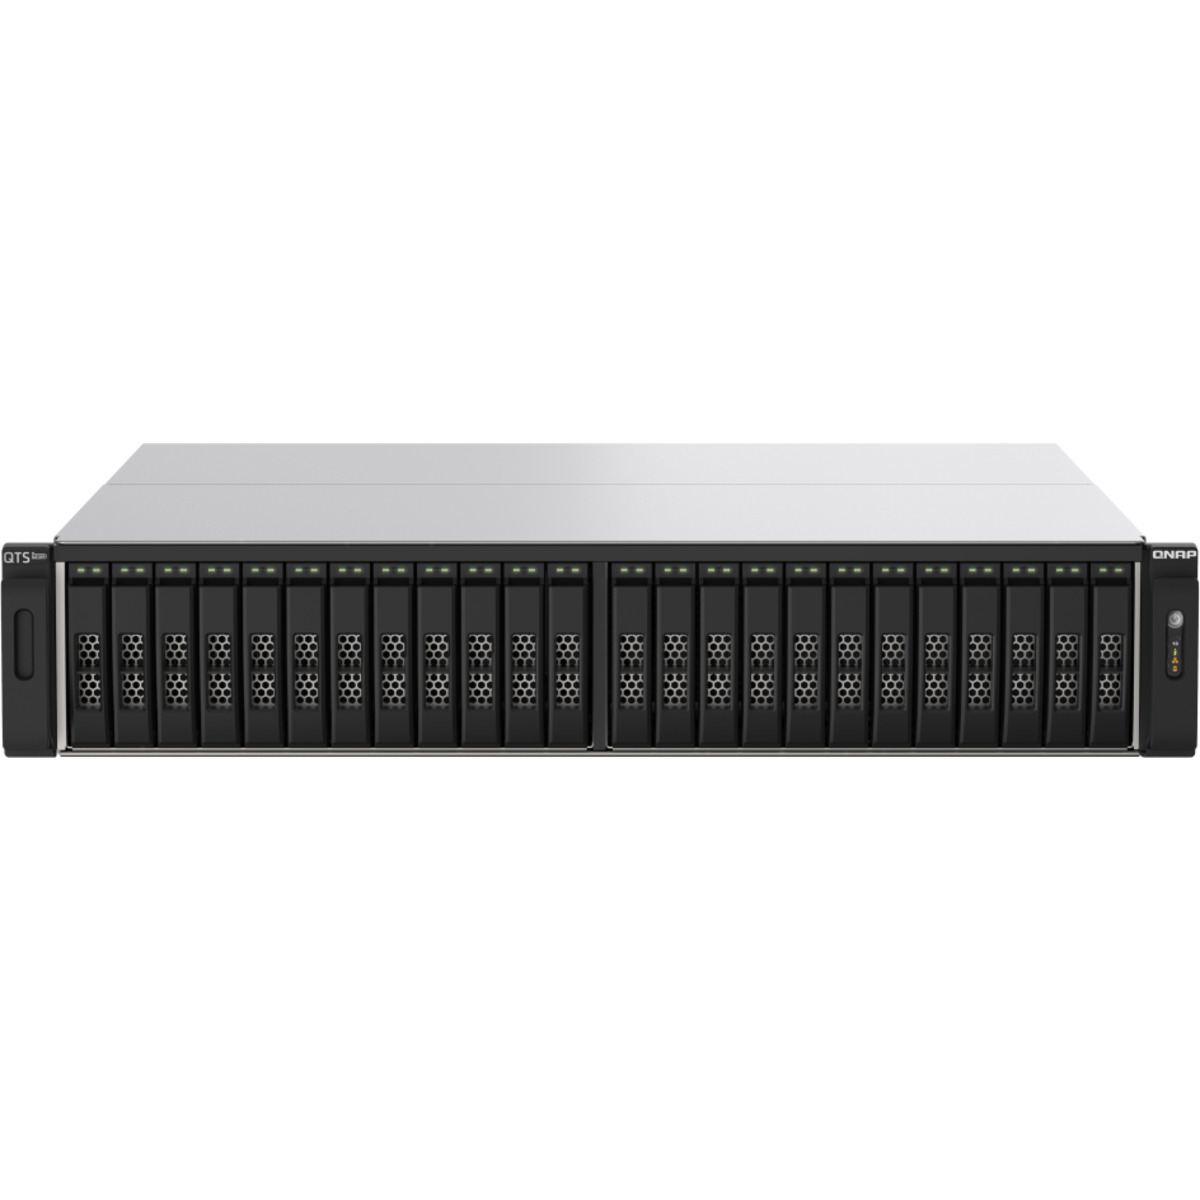 QNAP TS-h2490FU-7232P 88tb 24-Bay RackMount Large Business / Enterprise NAS - Network Attached Storage Device 22x4tb Sabrent Rocket 5 SB-RKT5-4TB  14000/12000MB/s M.2 2280 NVMe SSD CONSUMER Class Drives Installed - Burn-In Tested TS-h2490FU-7232P